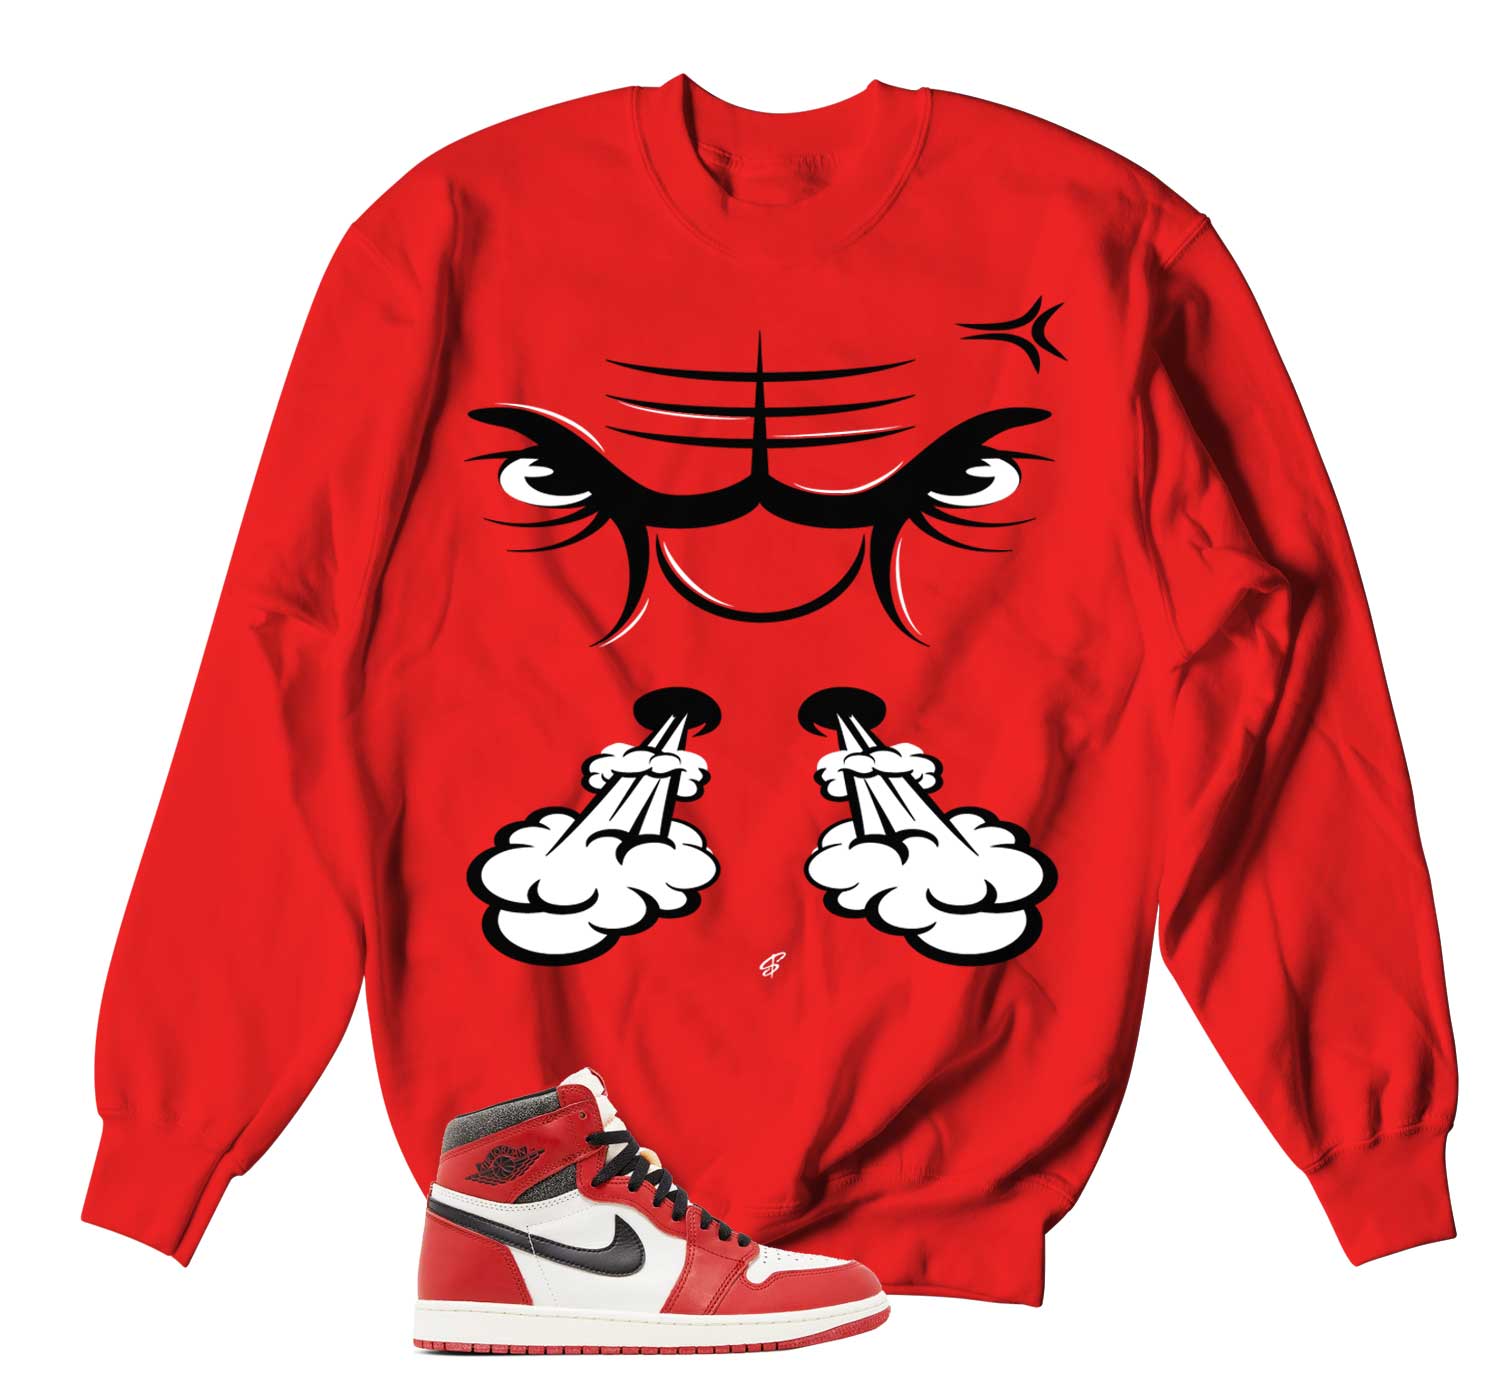 Retro 1 Lost And Found Sweater - Raging Face - Red